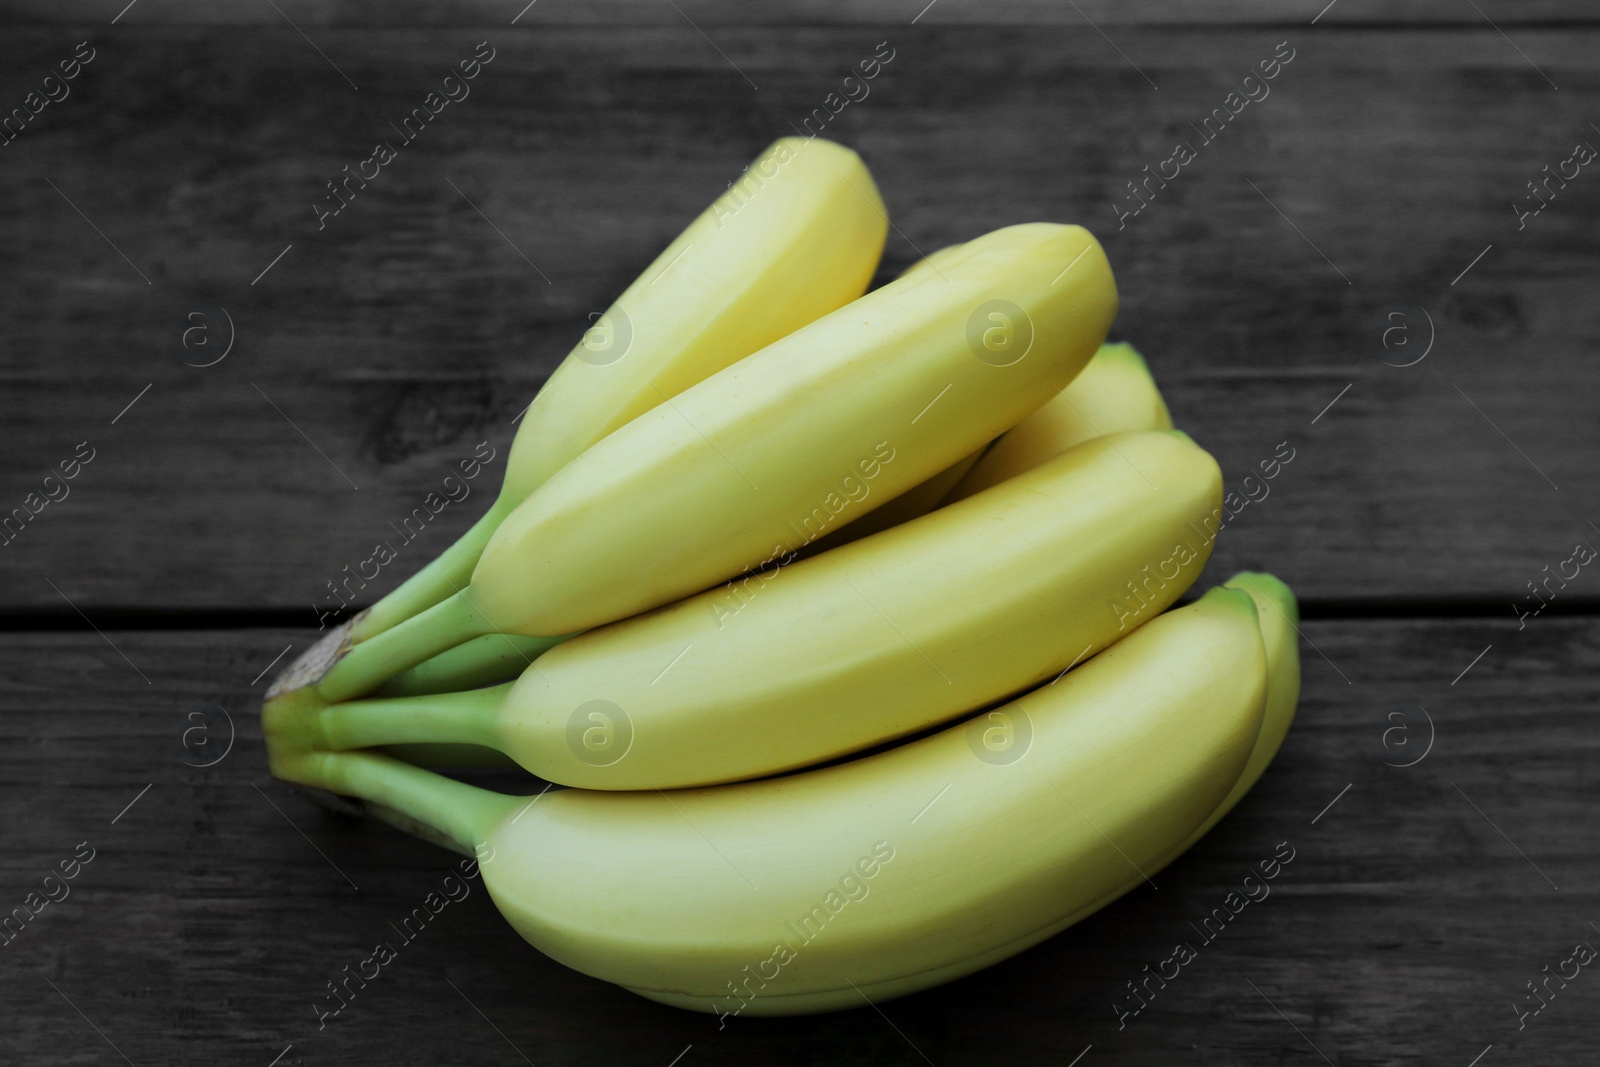 Photo of Bunch of ripe yellow bananas on wooden table